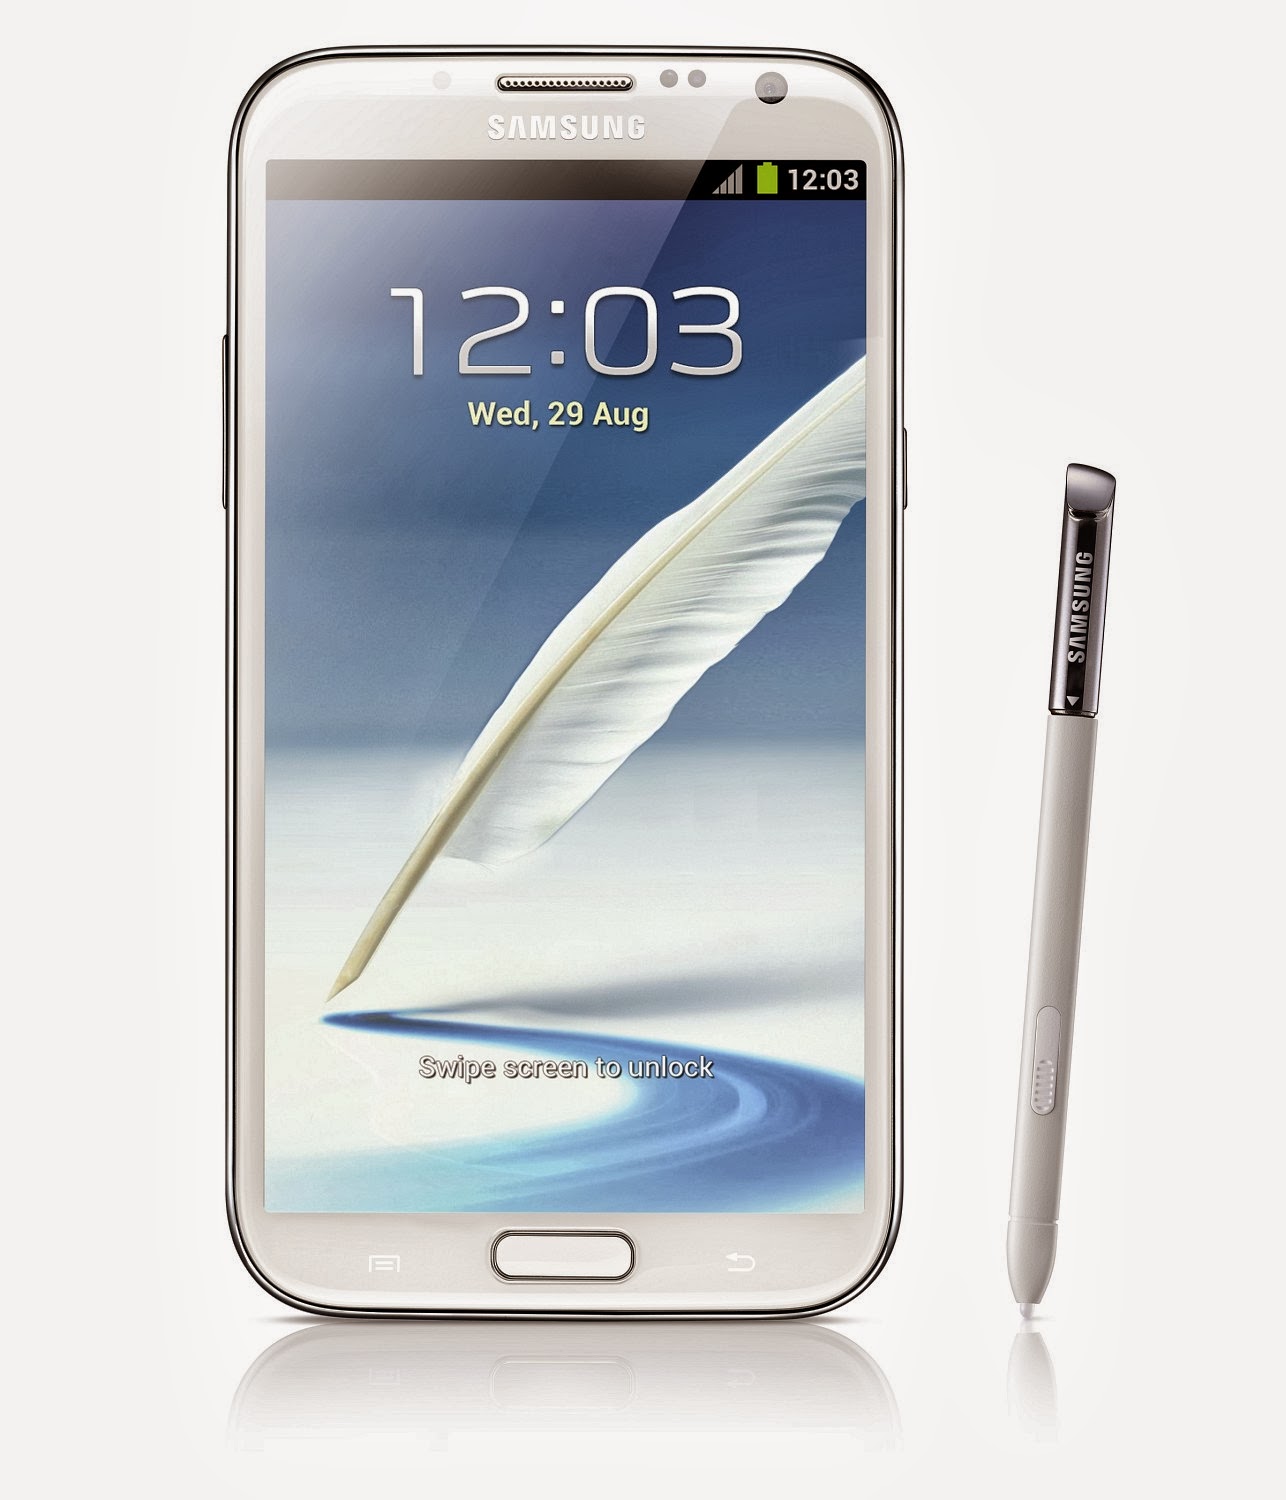 Samsung Galaxy Note 3 Full Phone Specifications